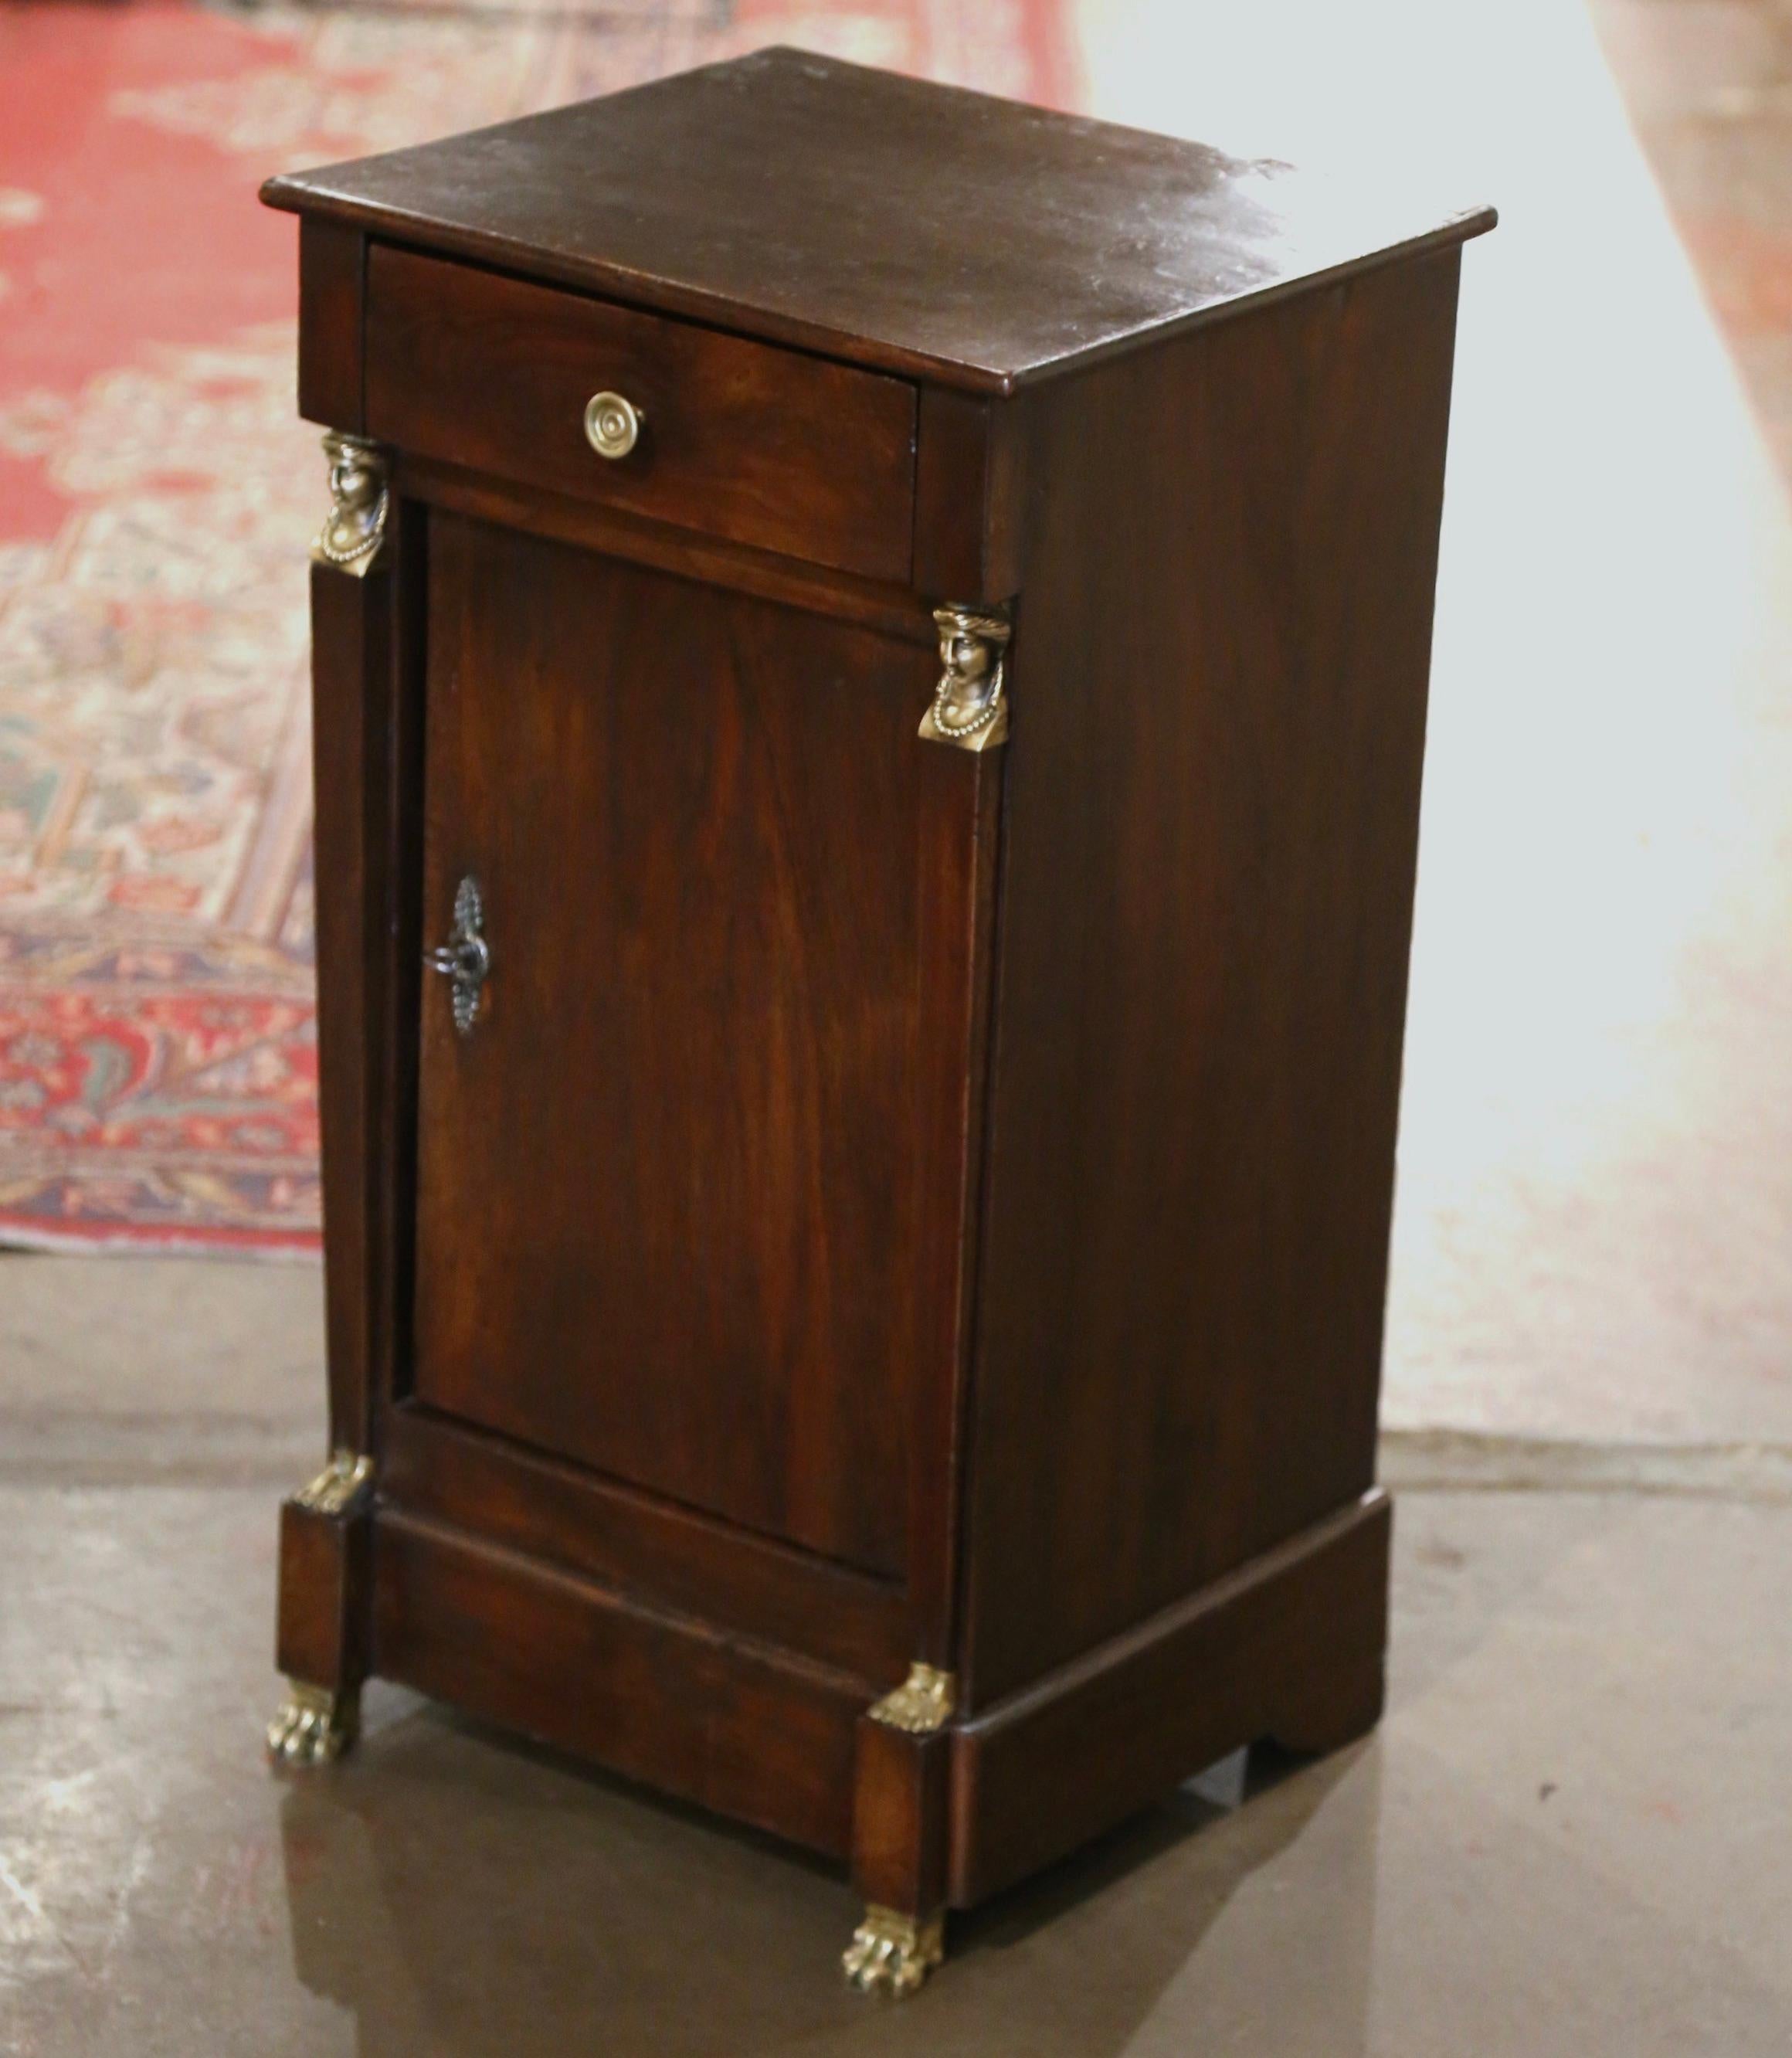 Crafted in France, circa 1880, the elegant antique cabinet stands on bronze paw feet over a wide straight bottom plinth; it is decorated at the shoulder with Egyptian woman faces, ending with feet sculptures at the bottom. The small fruit wood chest